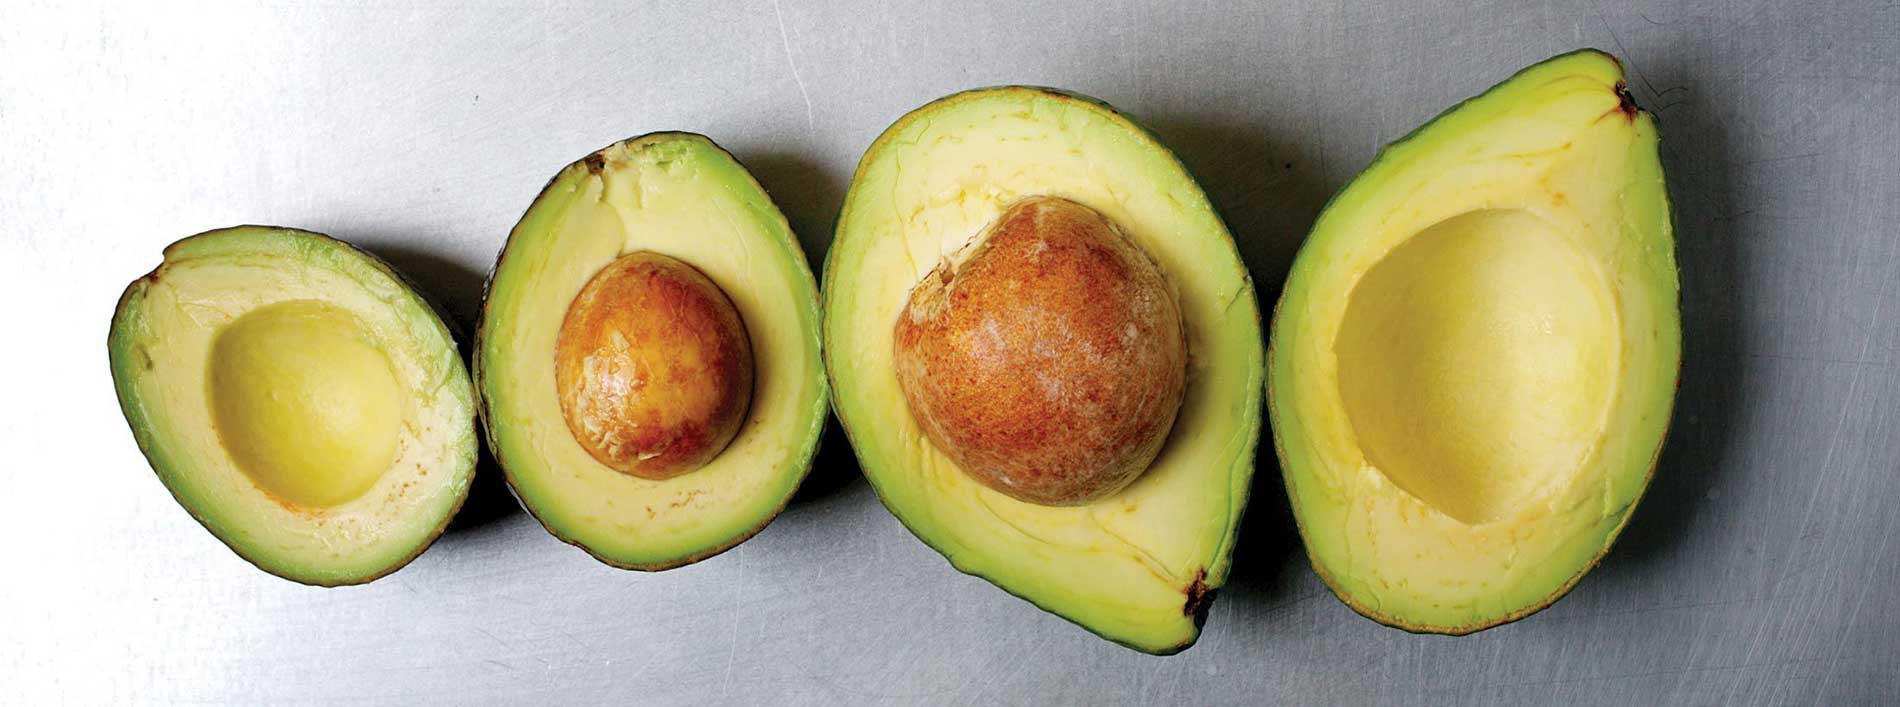 Curious facts about avocado